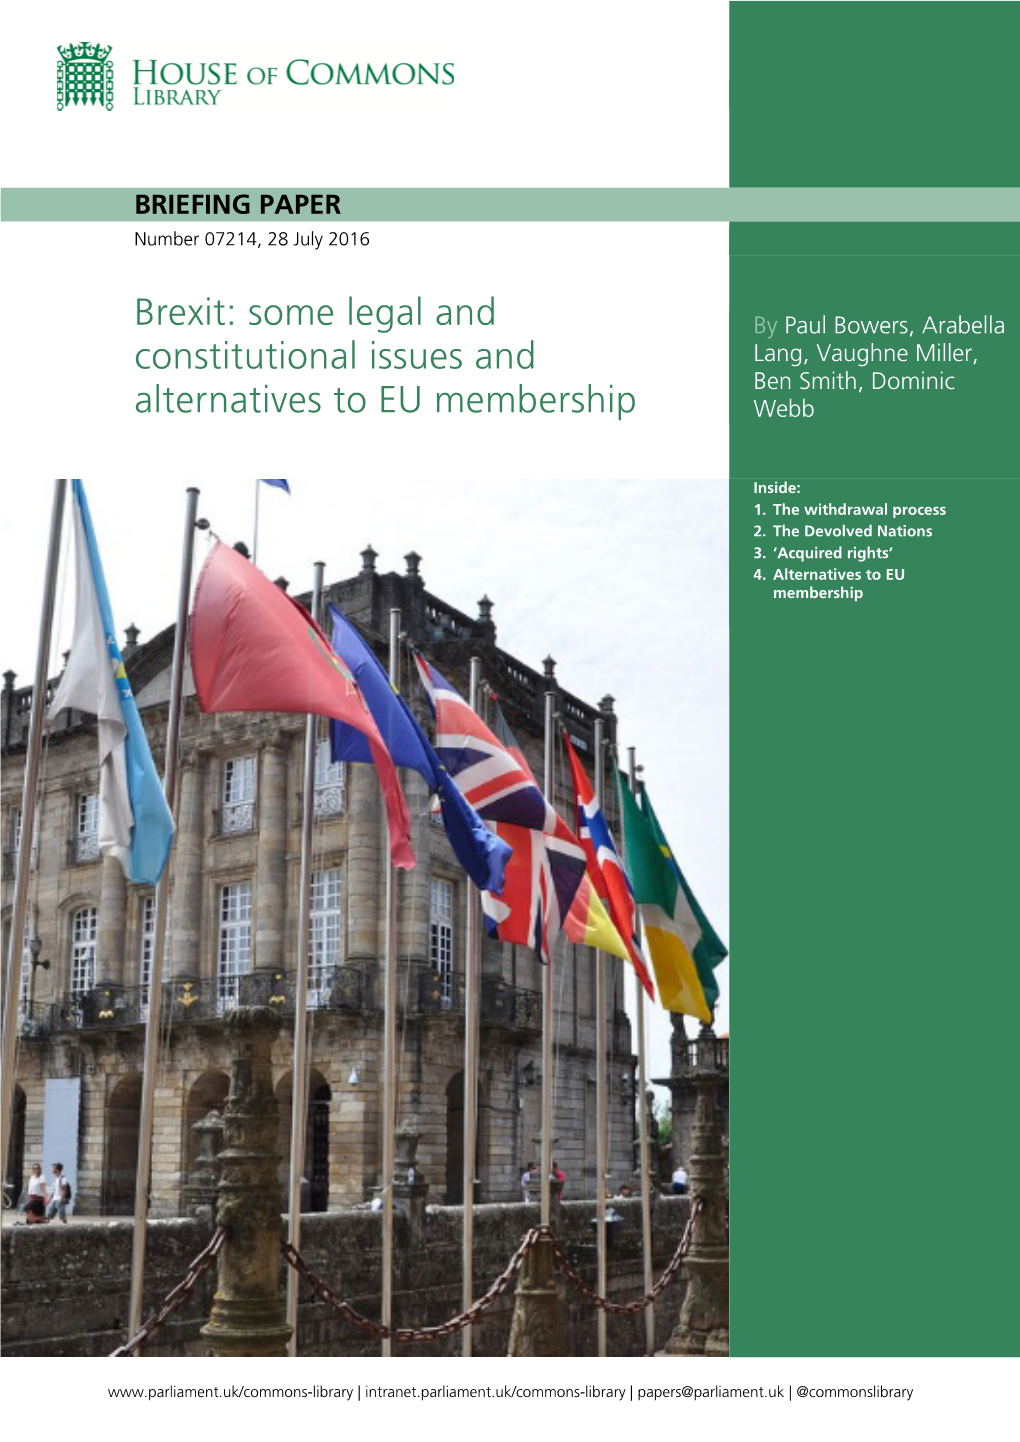 Some Legal and Constitutional Issues and Alternatives to EU Membership